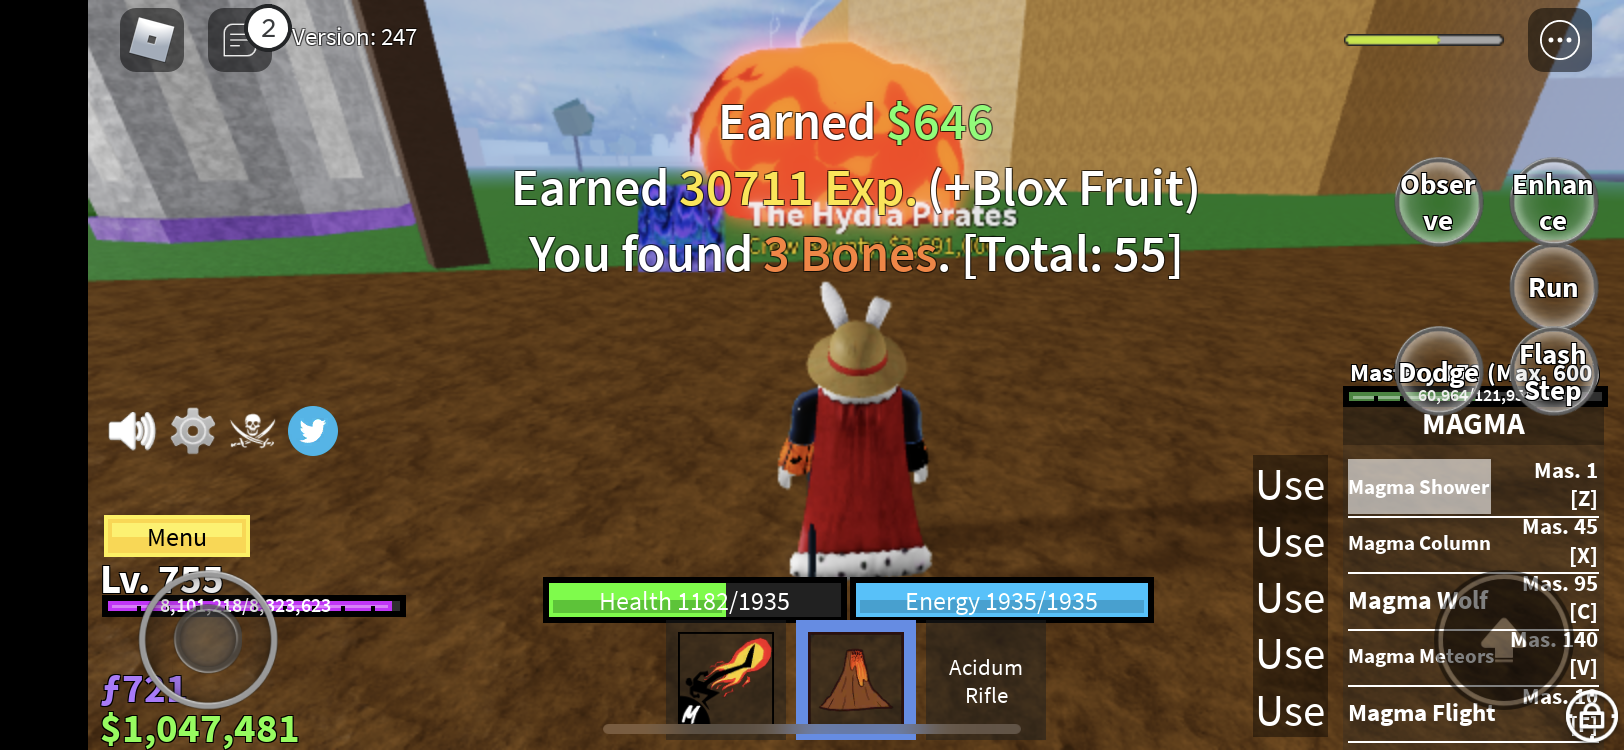 How to find the Death King in Blox Fruits (Sea 1, 2, 3) - Try Hard